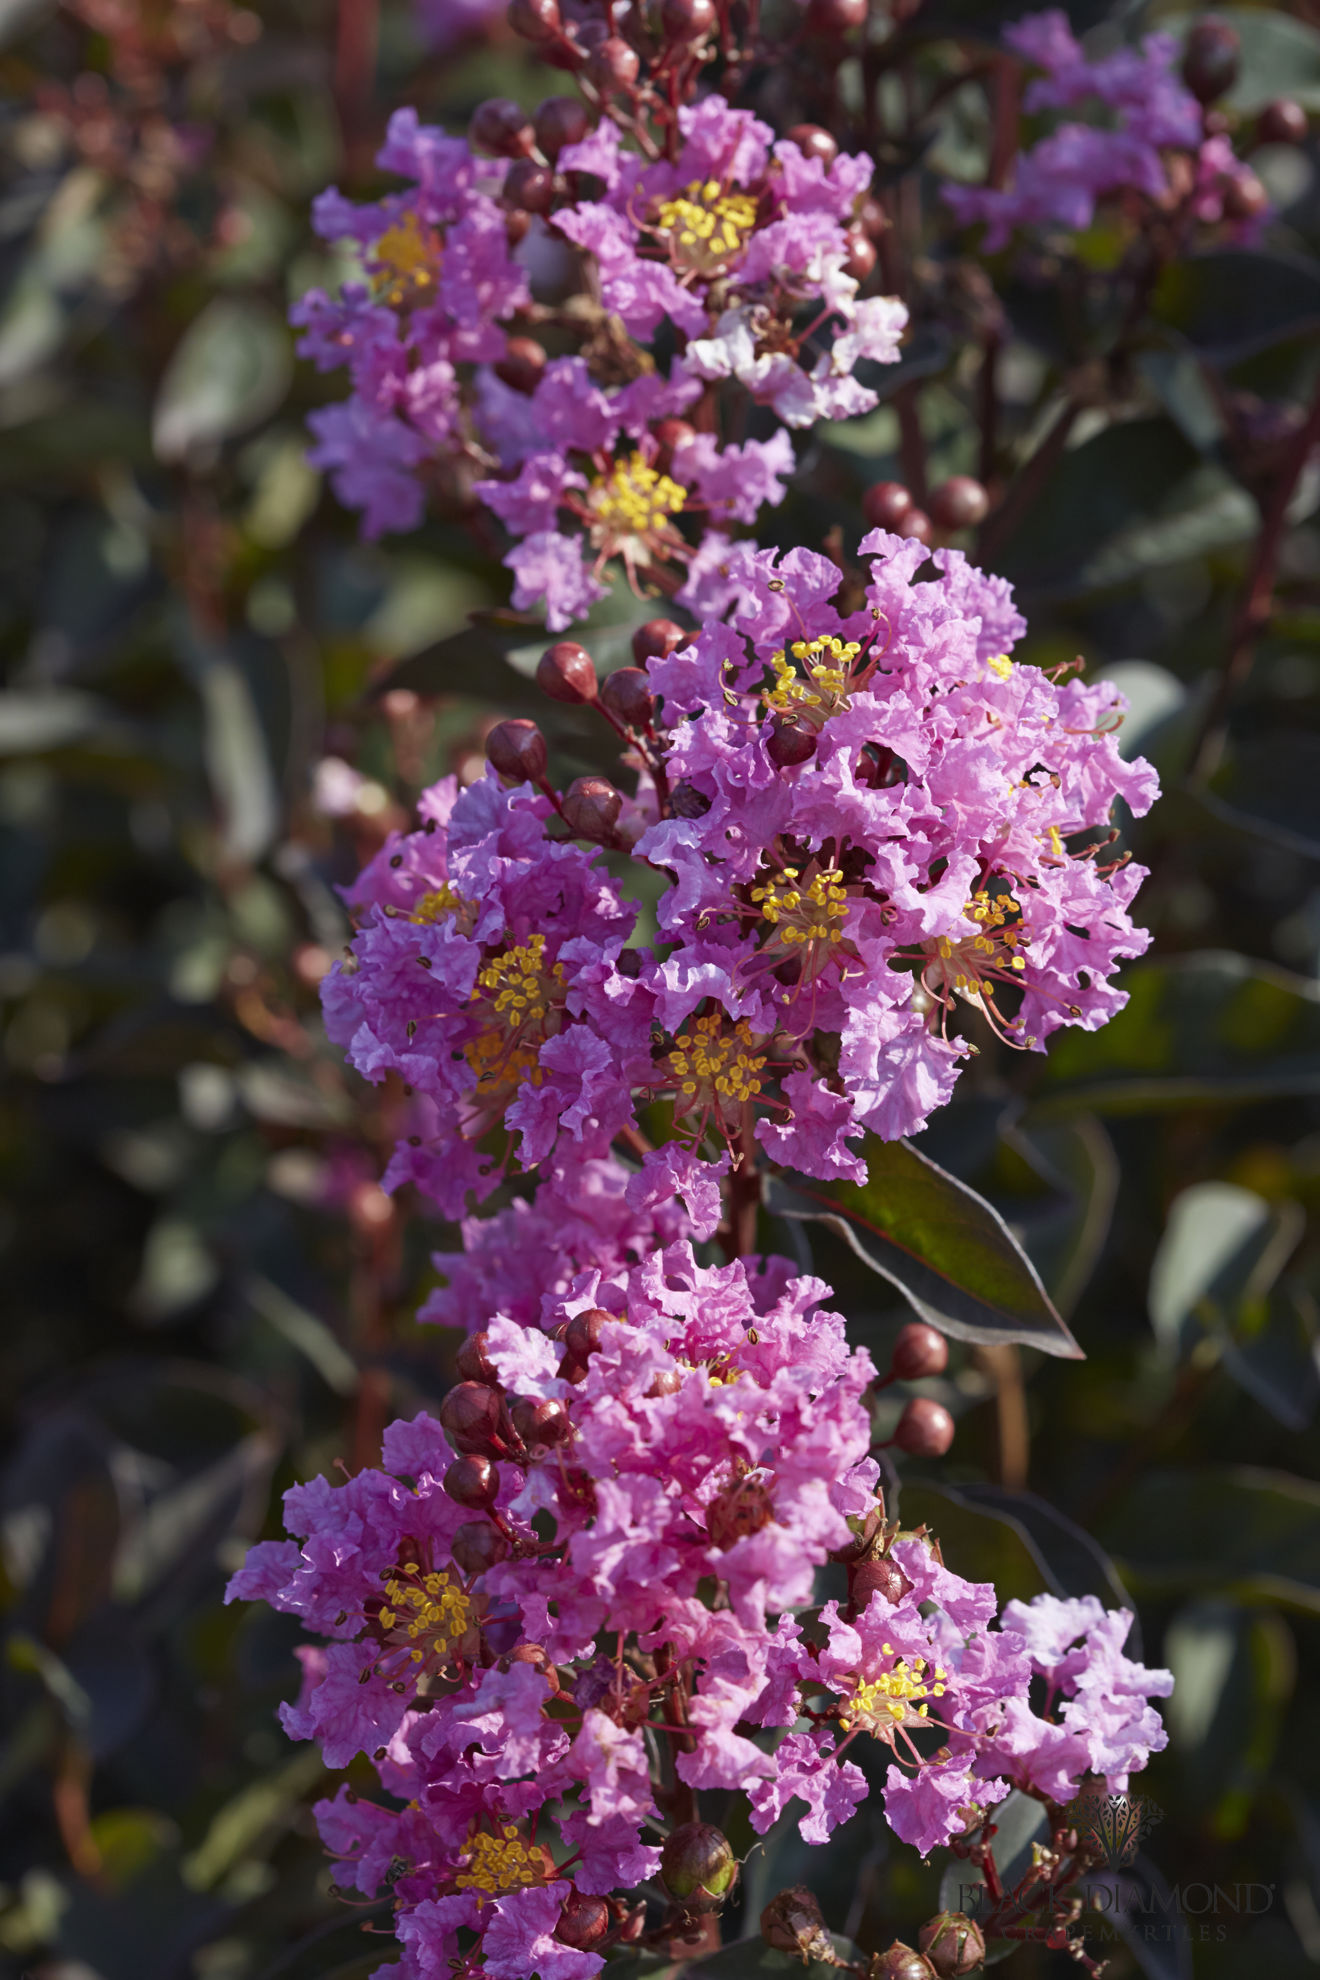 http://www.breederplants.nl/images/thumbs/0002018_Lagerstroemia 'Lavender Lace' (1).jpeg